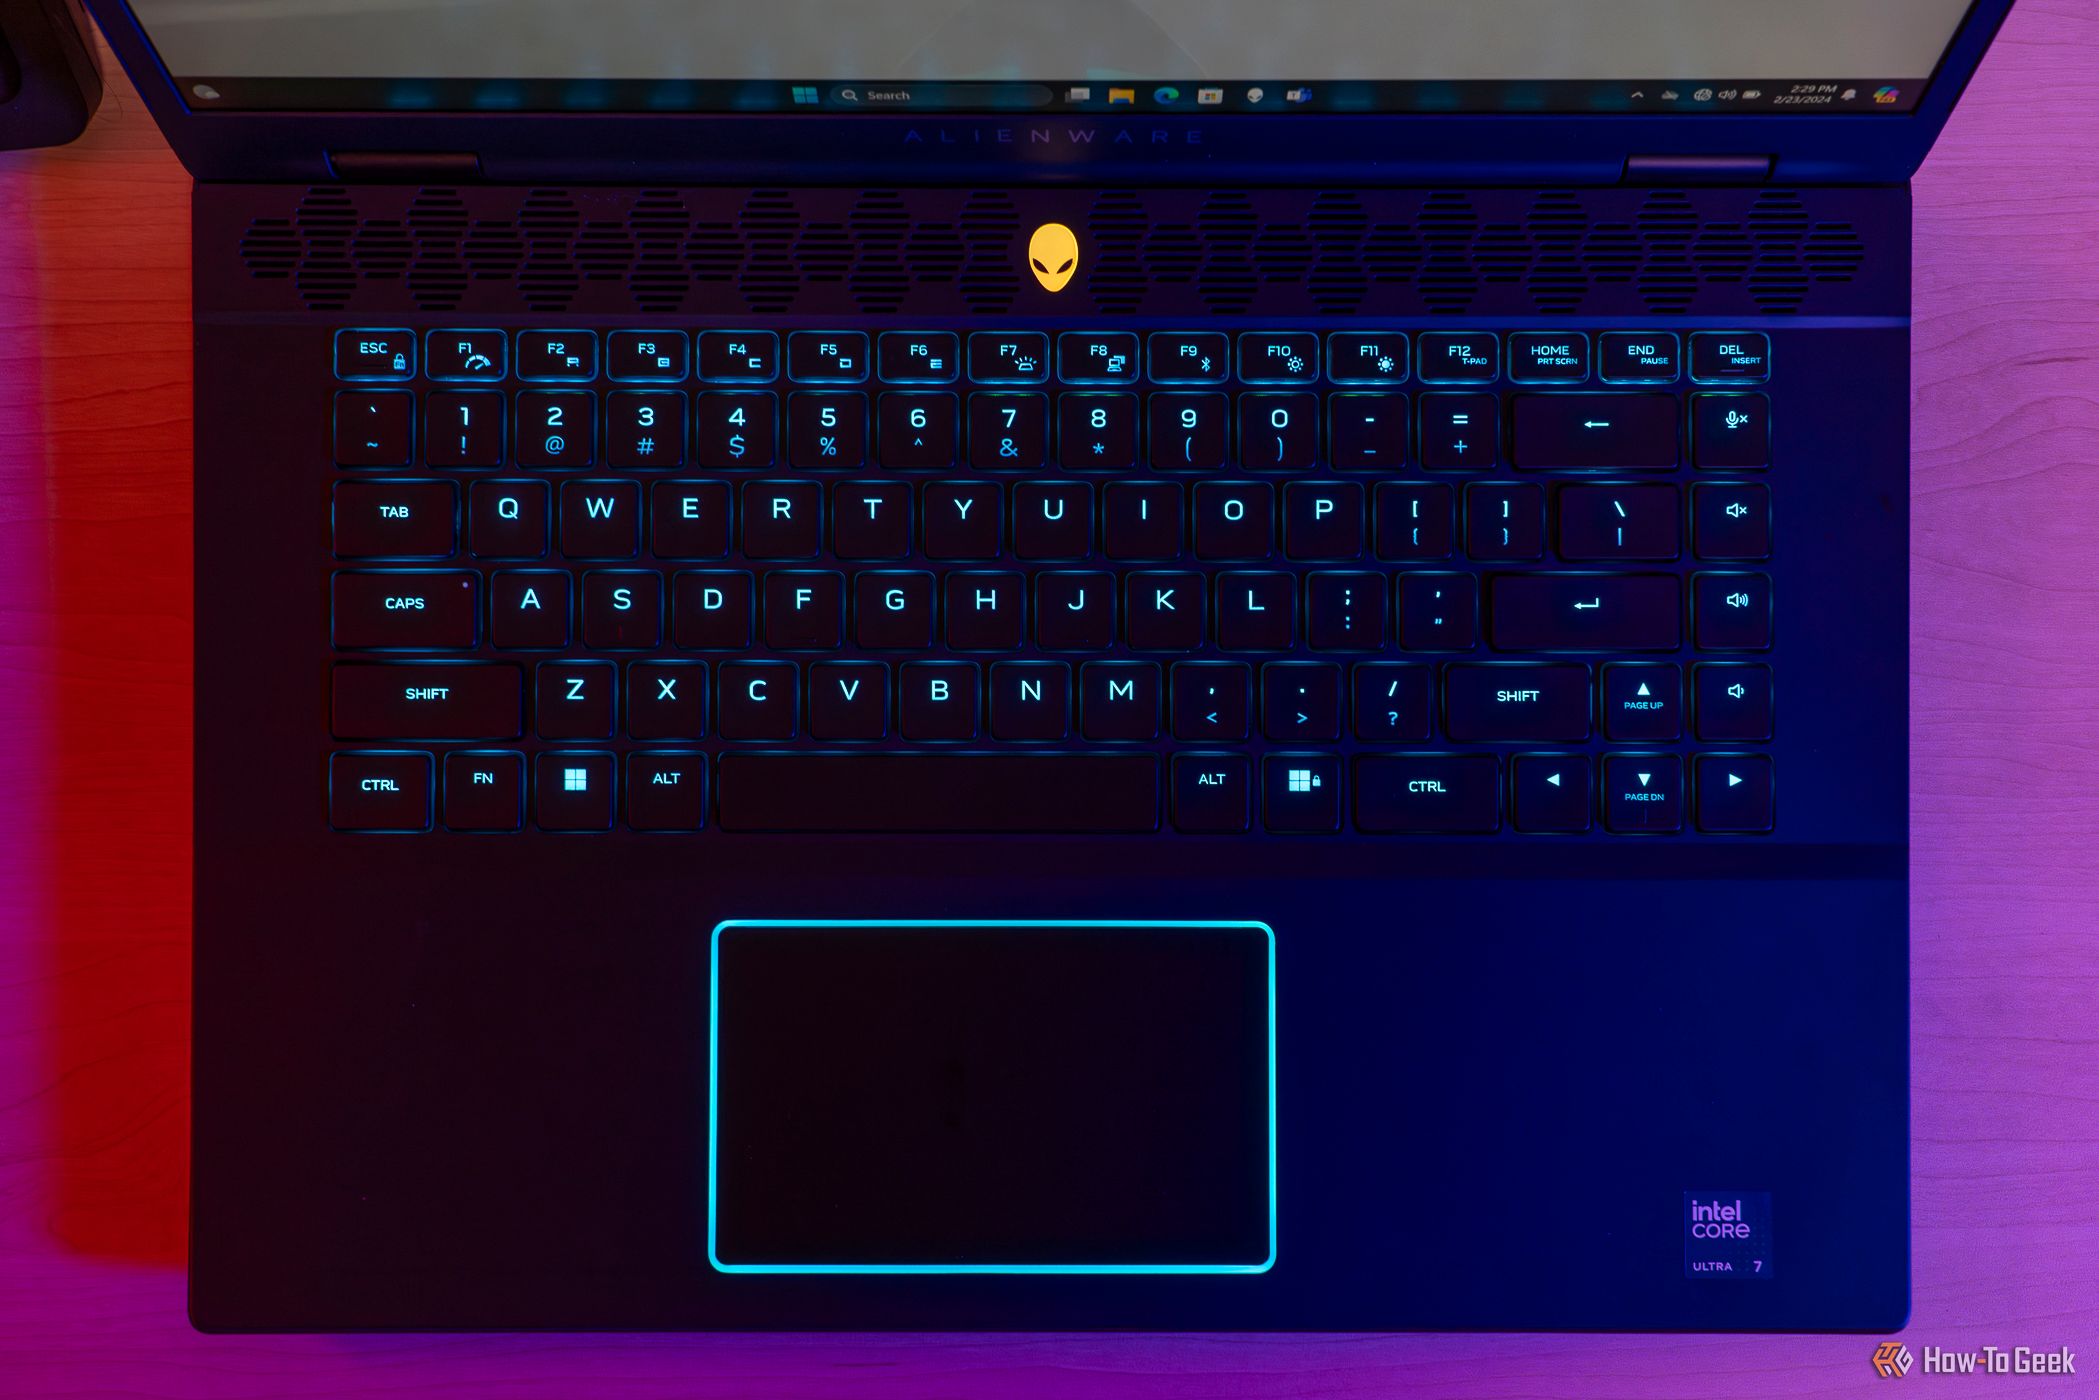 Top view of the Alienware m16 R2 keyboard and touchpad.